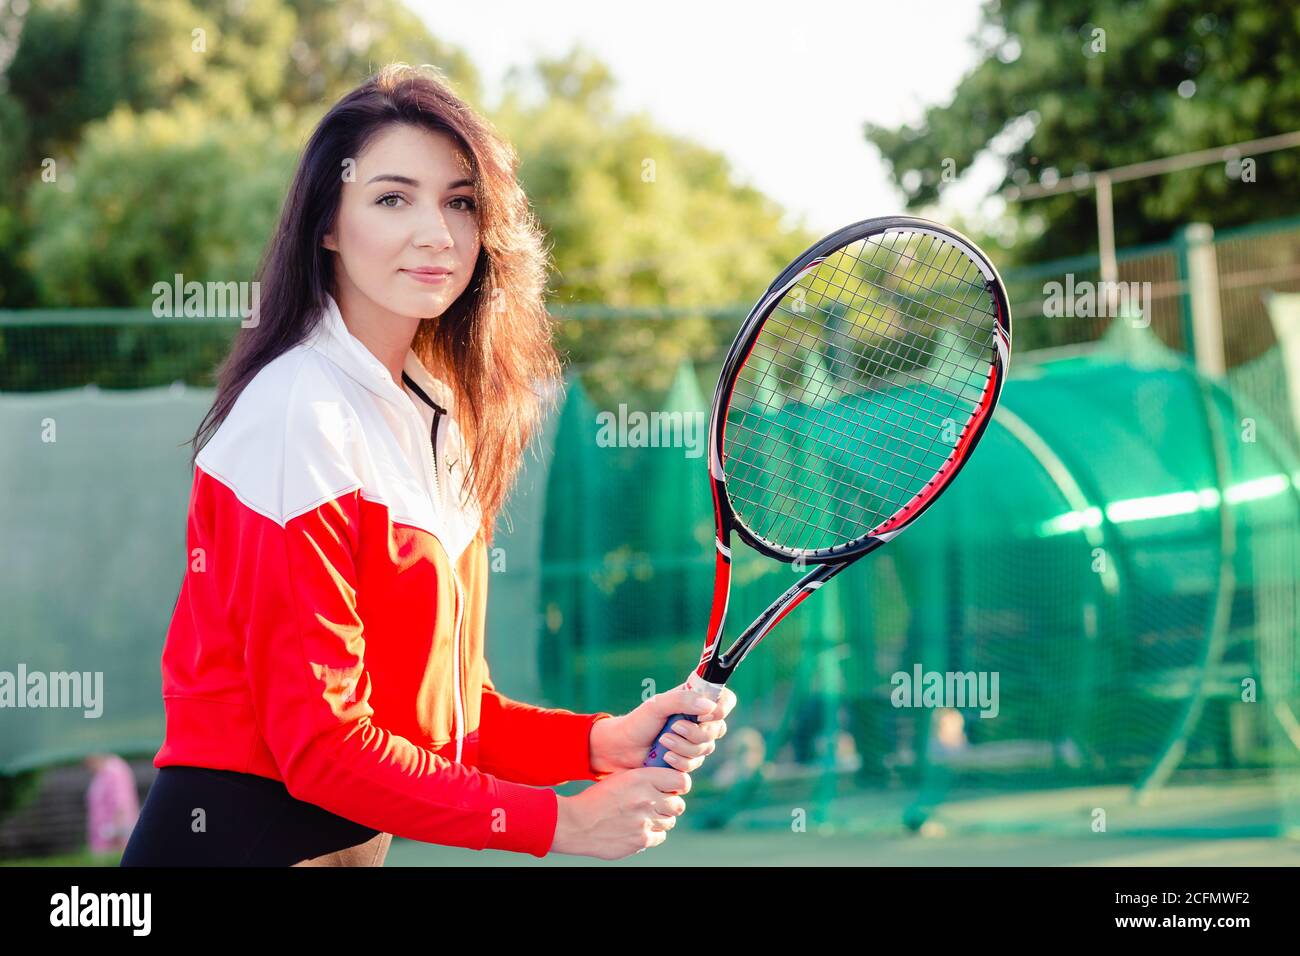 Portrait of a beautiful young female tennis player in sports clothing holding tennis racket on court. Stock Photo